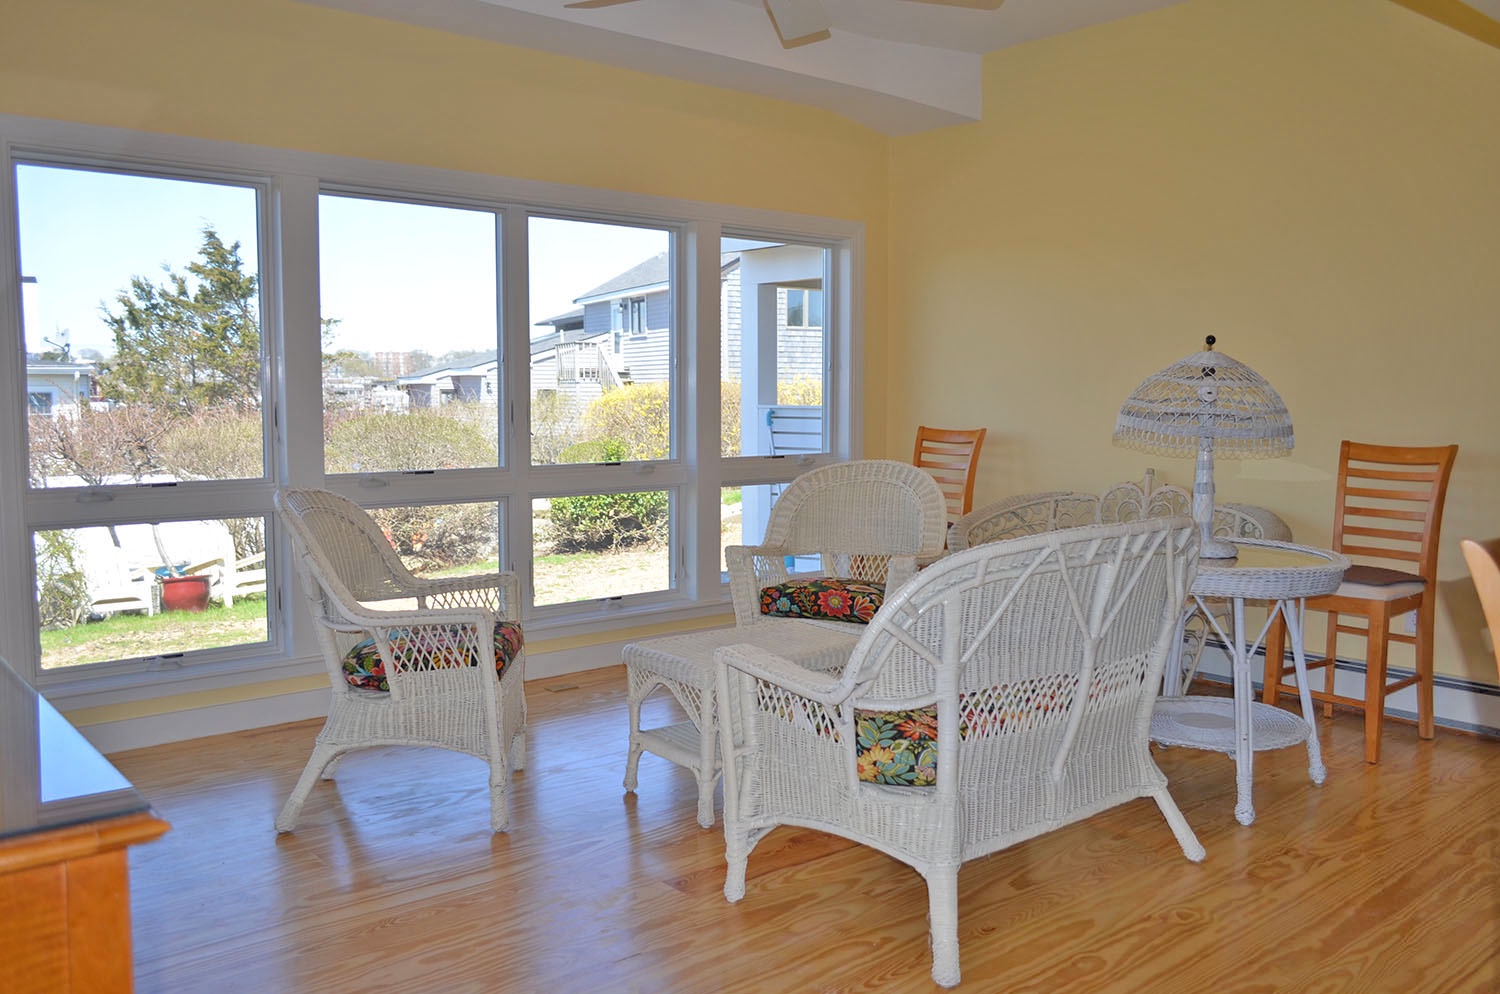 A second sitting area with views of Gloucester Harbor.